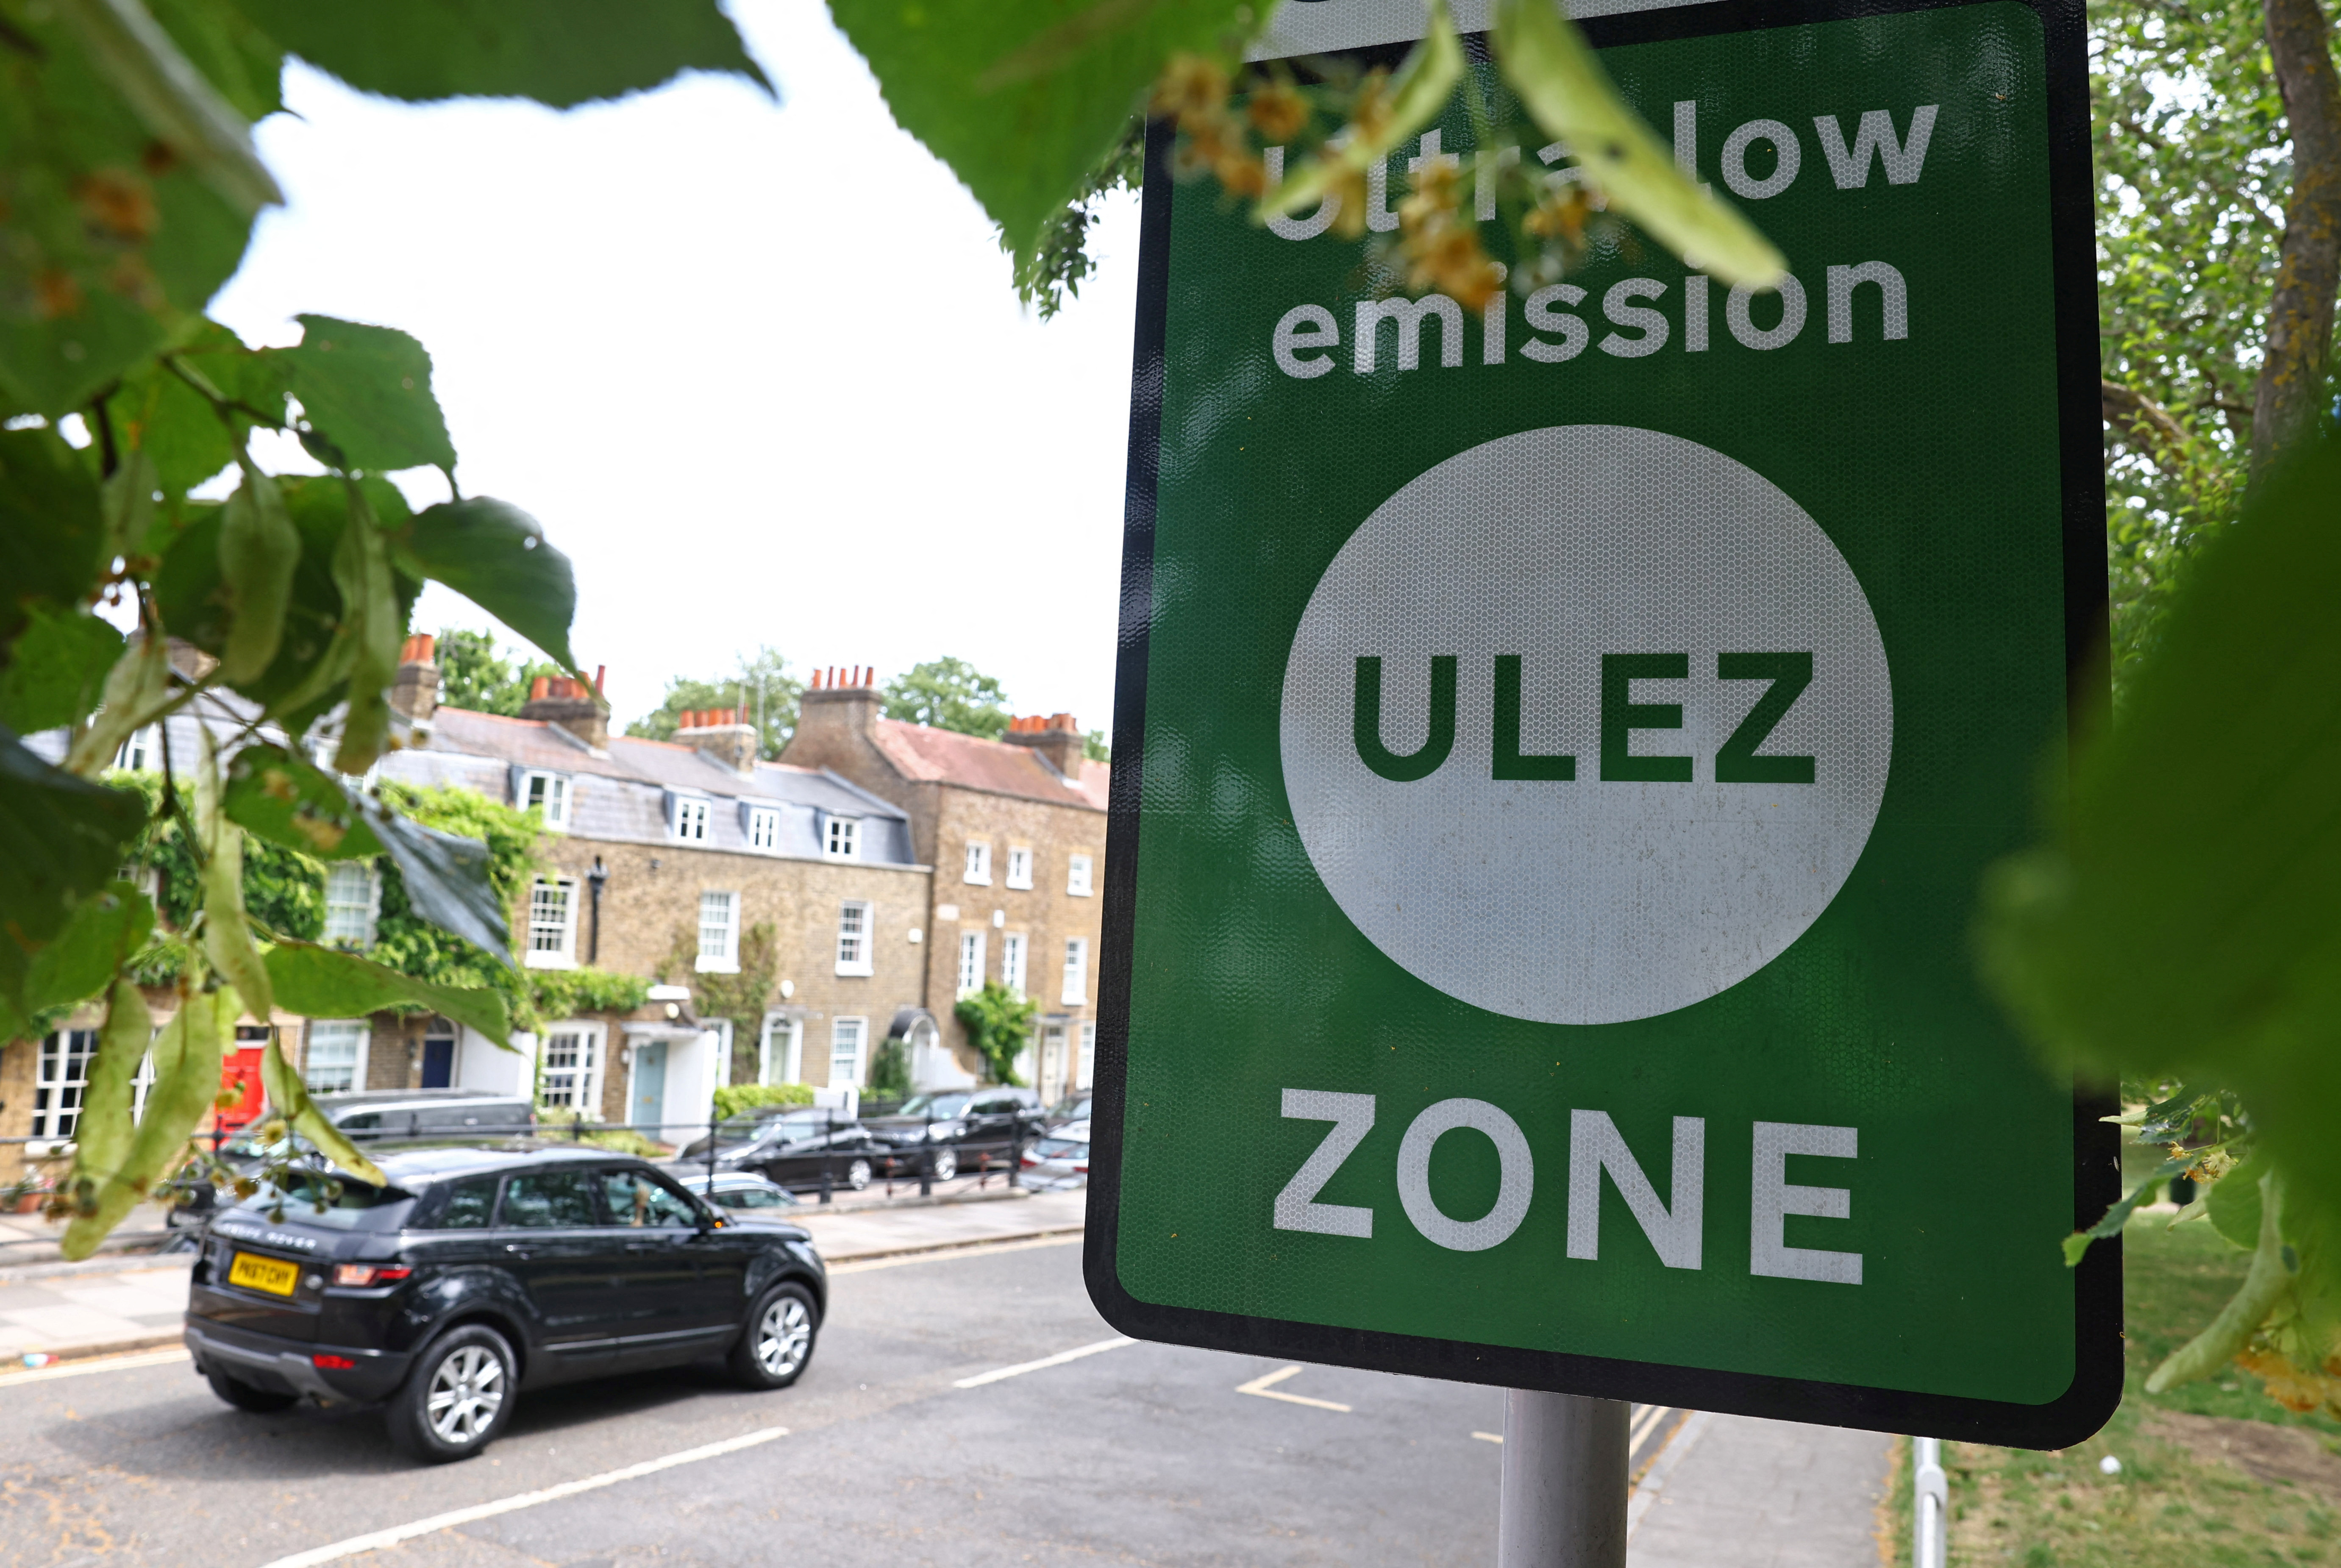 Signage along boundary of London's Ultra Low Emissions Zone (ULEZ) zone ahead of proposed upcoming expansion, in London